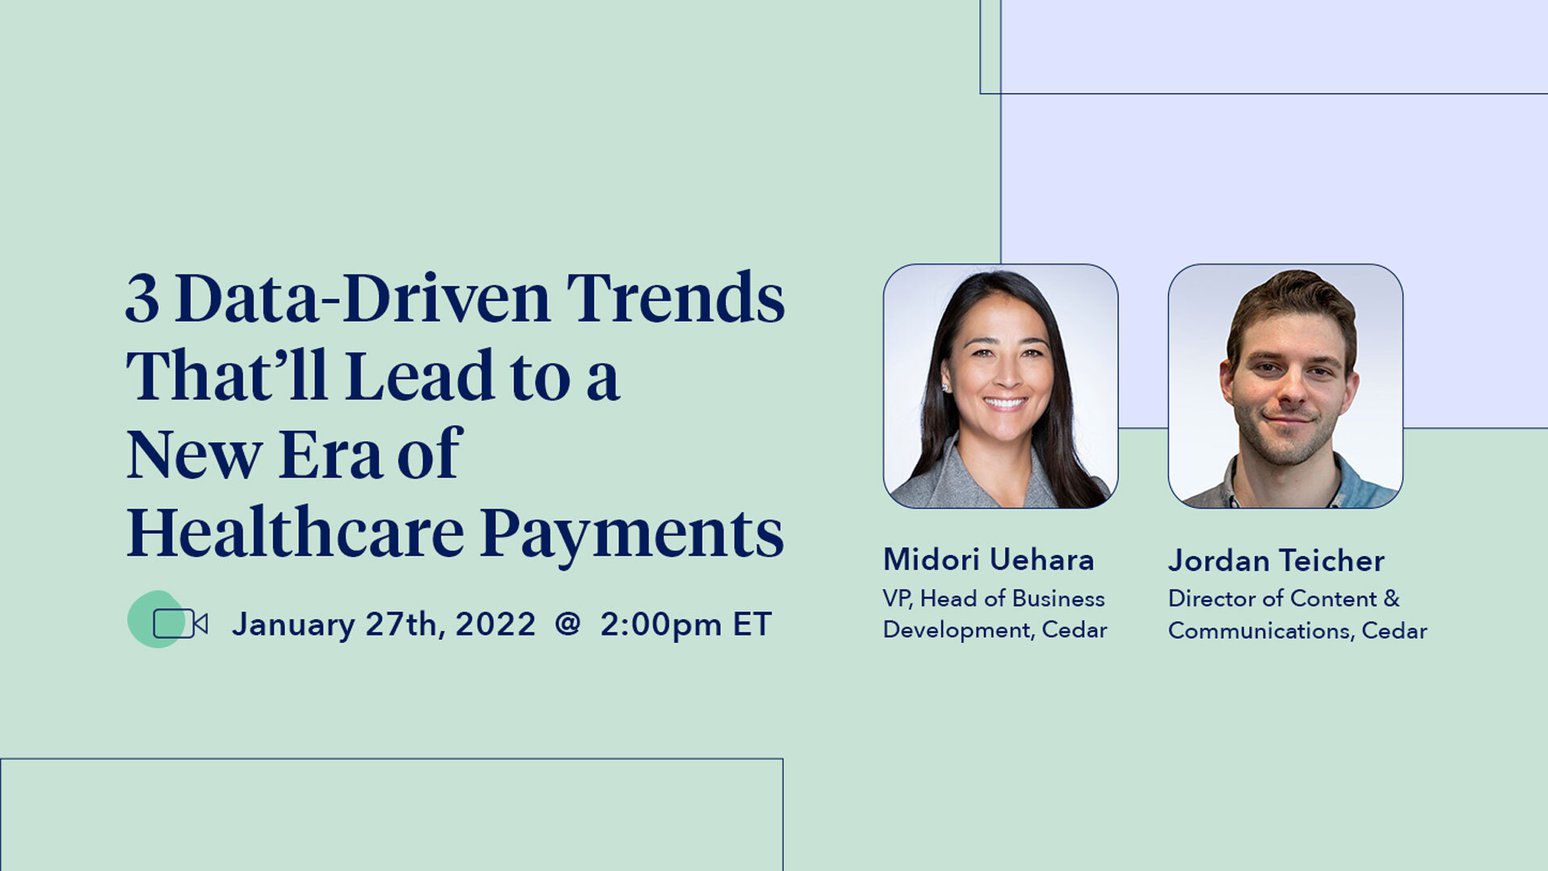 3 data-driven trends that will lead to a new era of healthcare payments